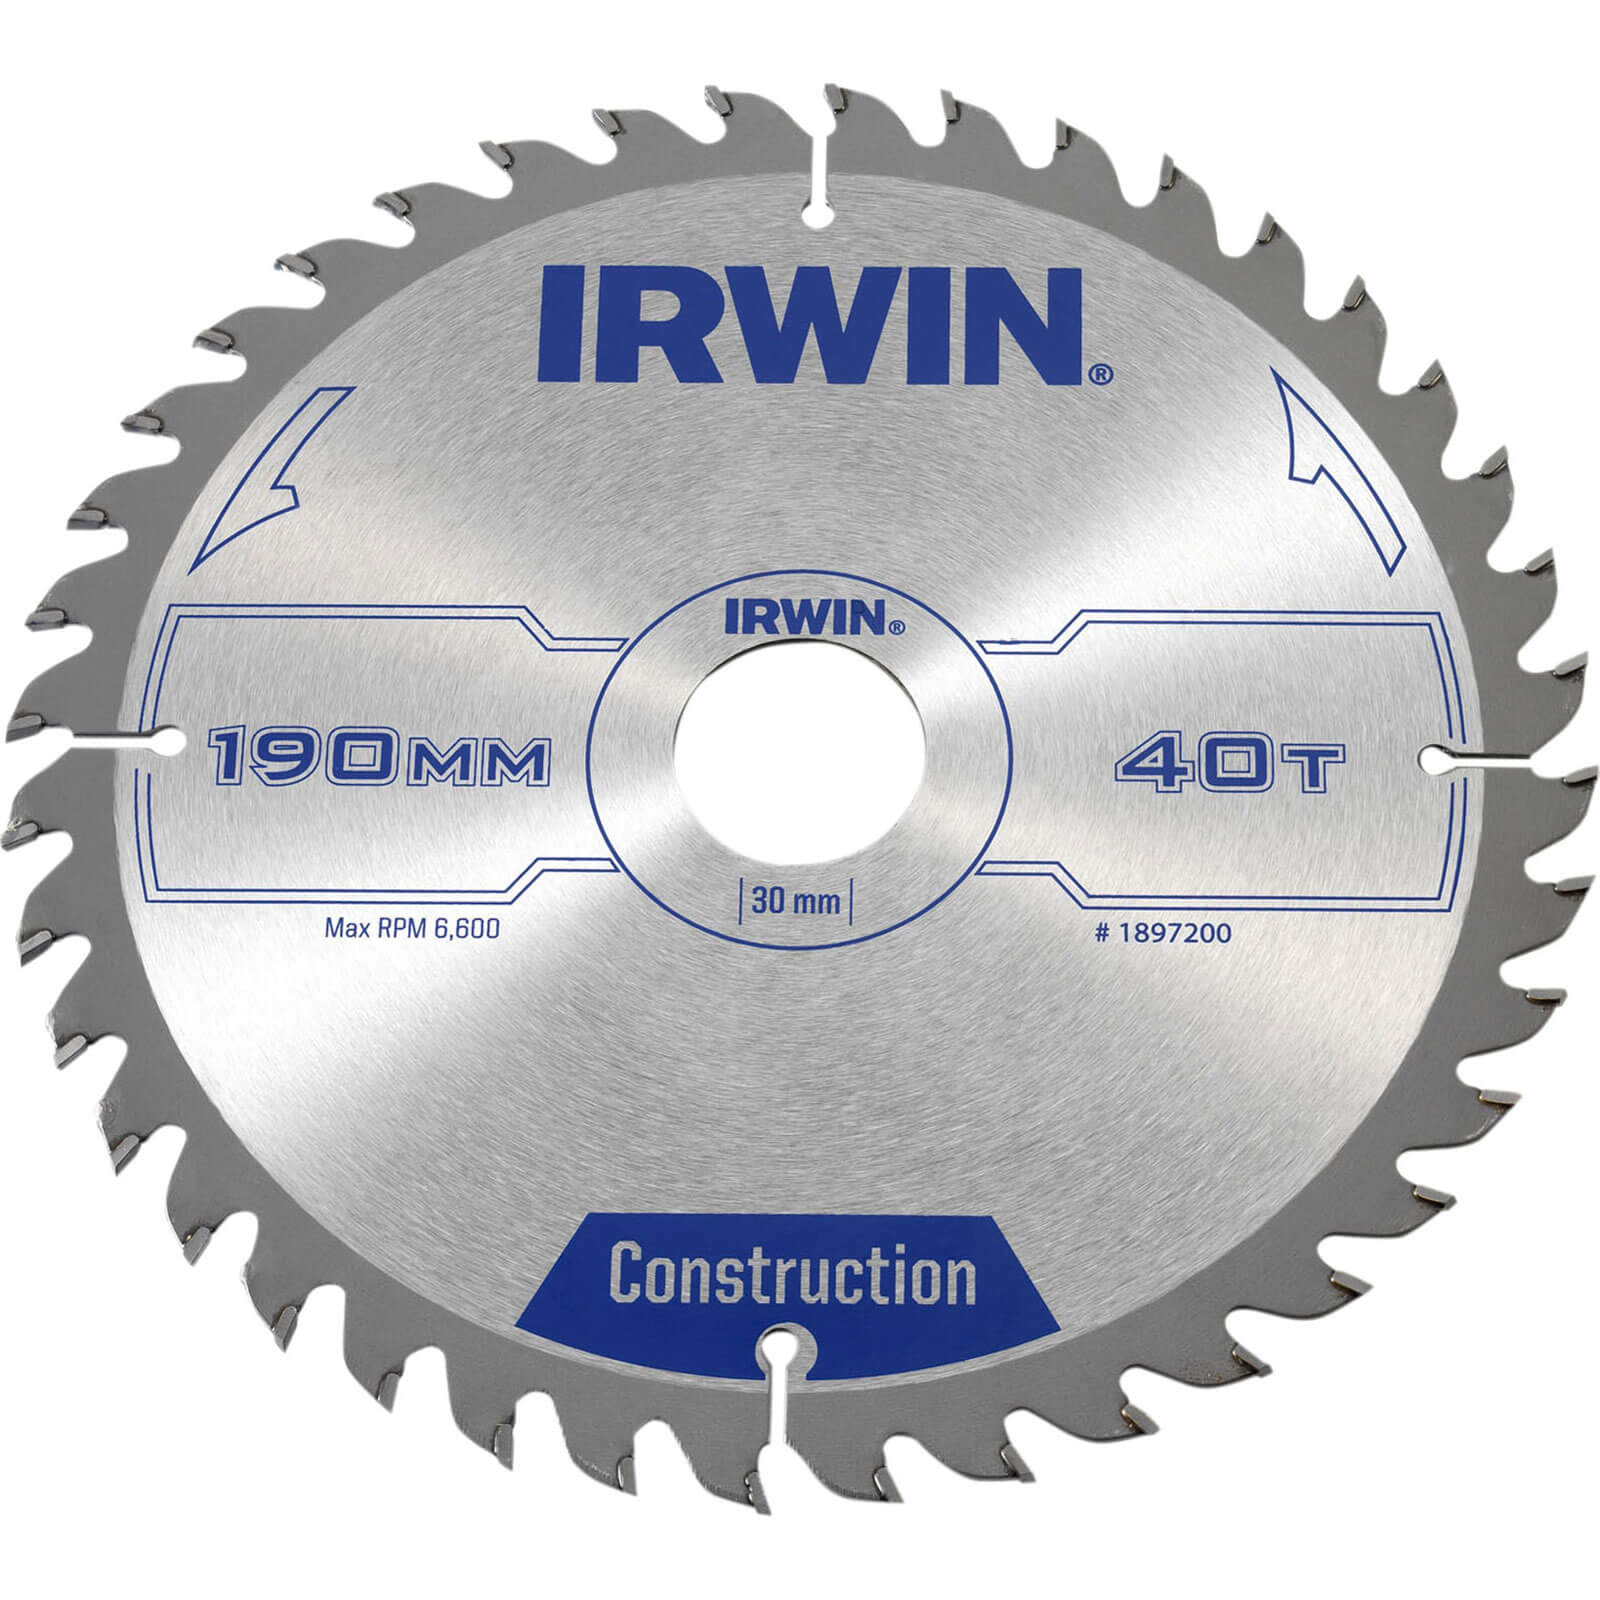 Photo of Irwin Atb Construction Circular Saw Blade 190mm 40t 30mm